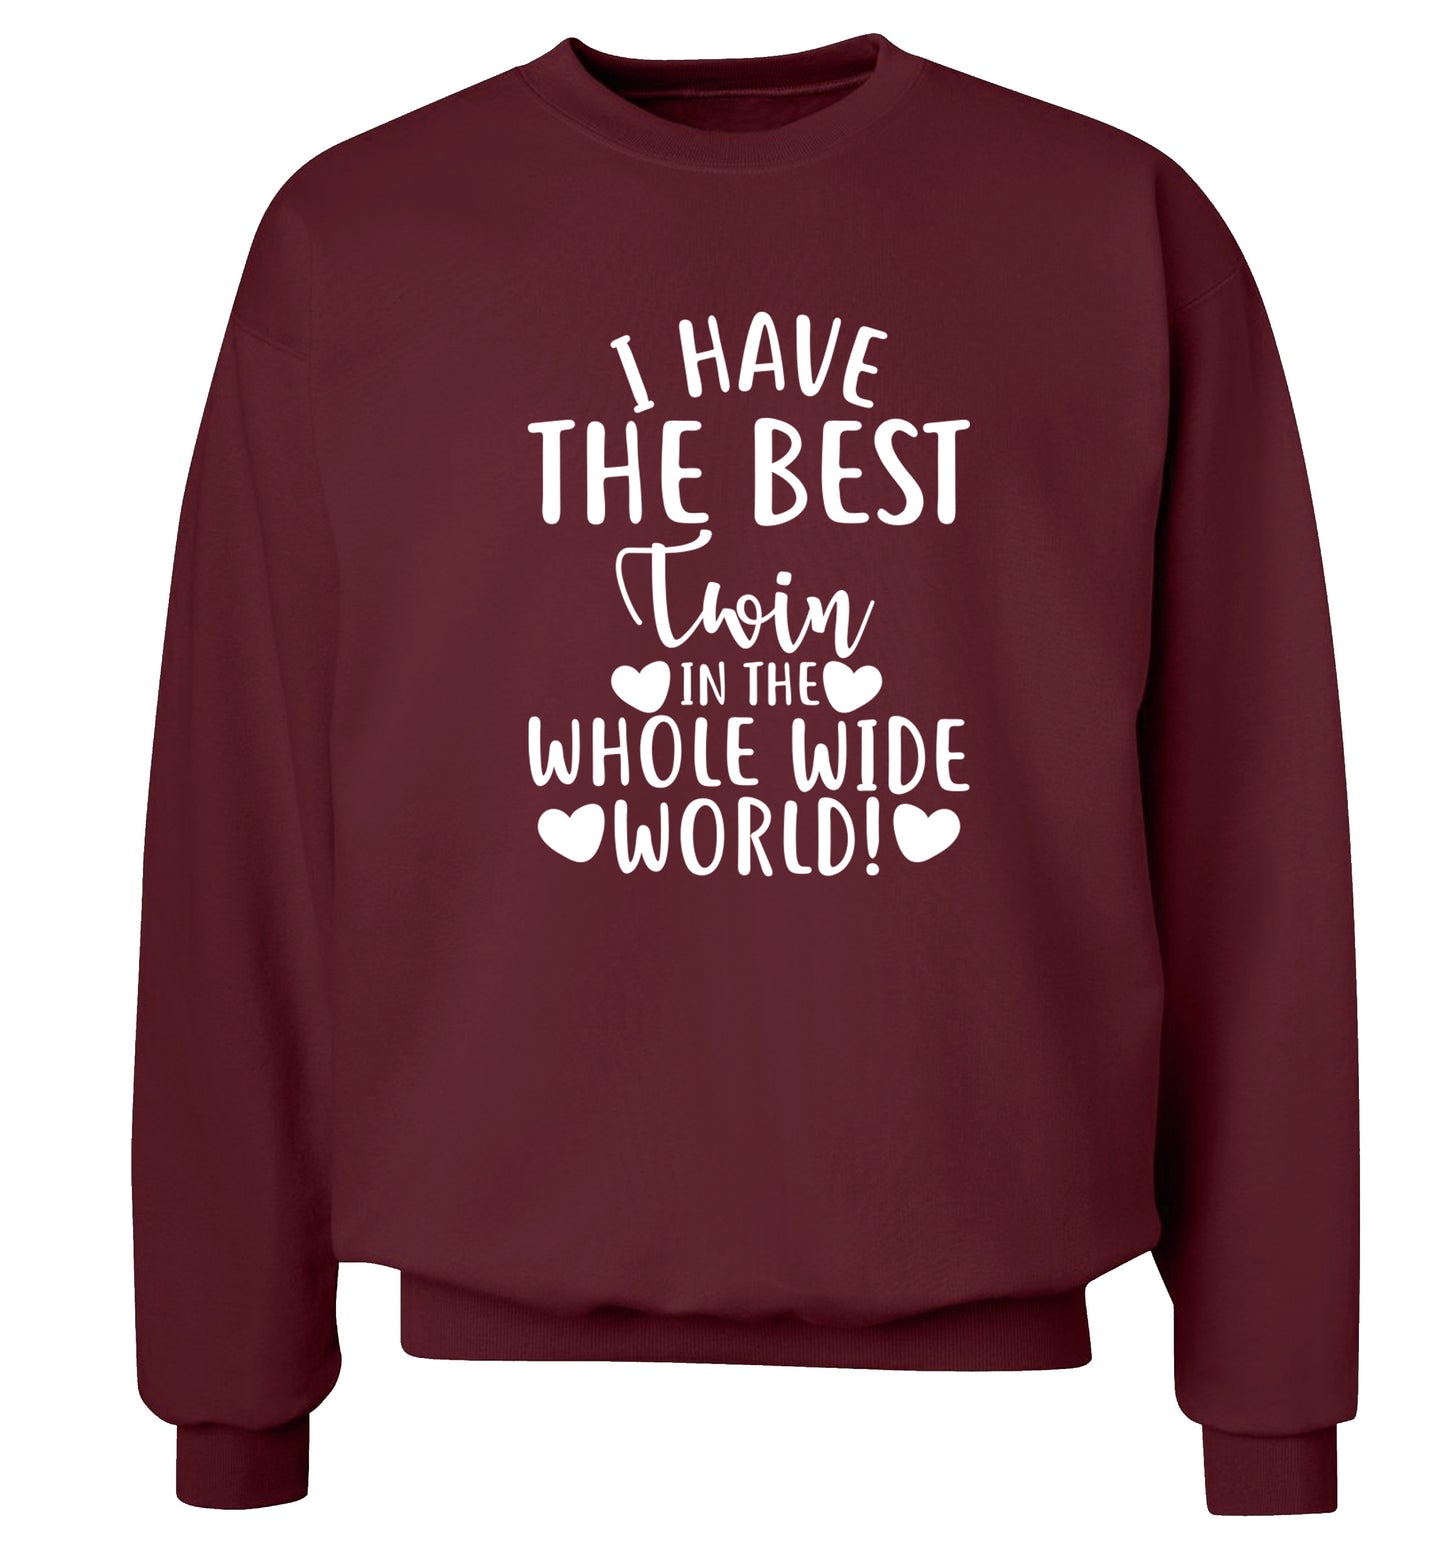 I have the best twin in the whole wide world! Adult's unisex maroon Sweater 2XL